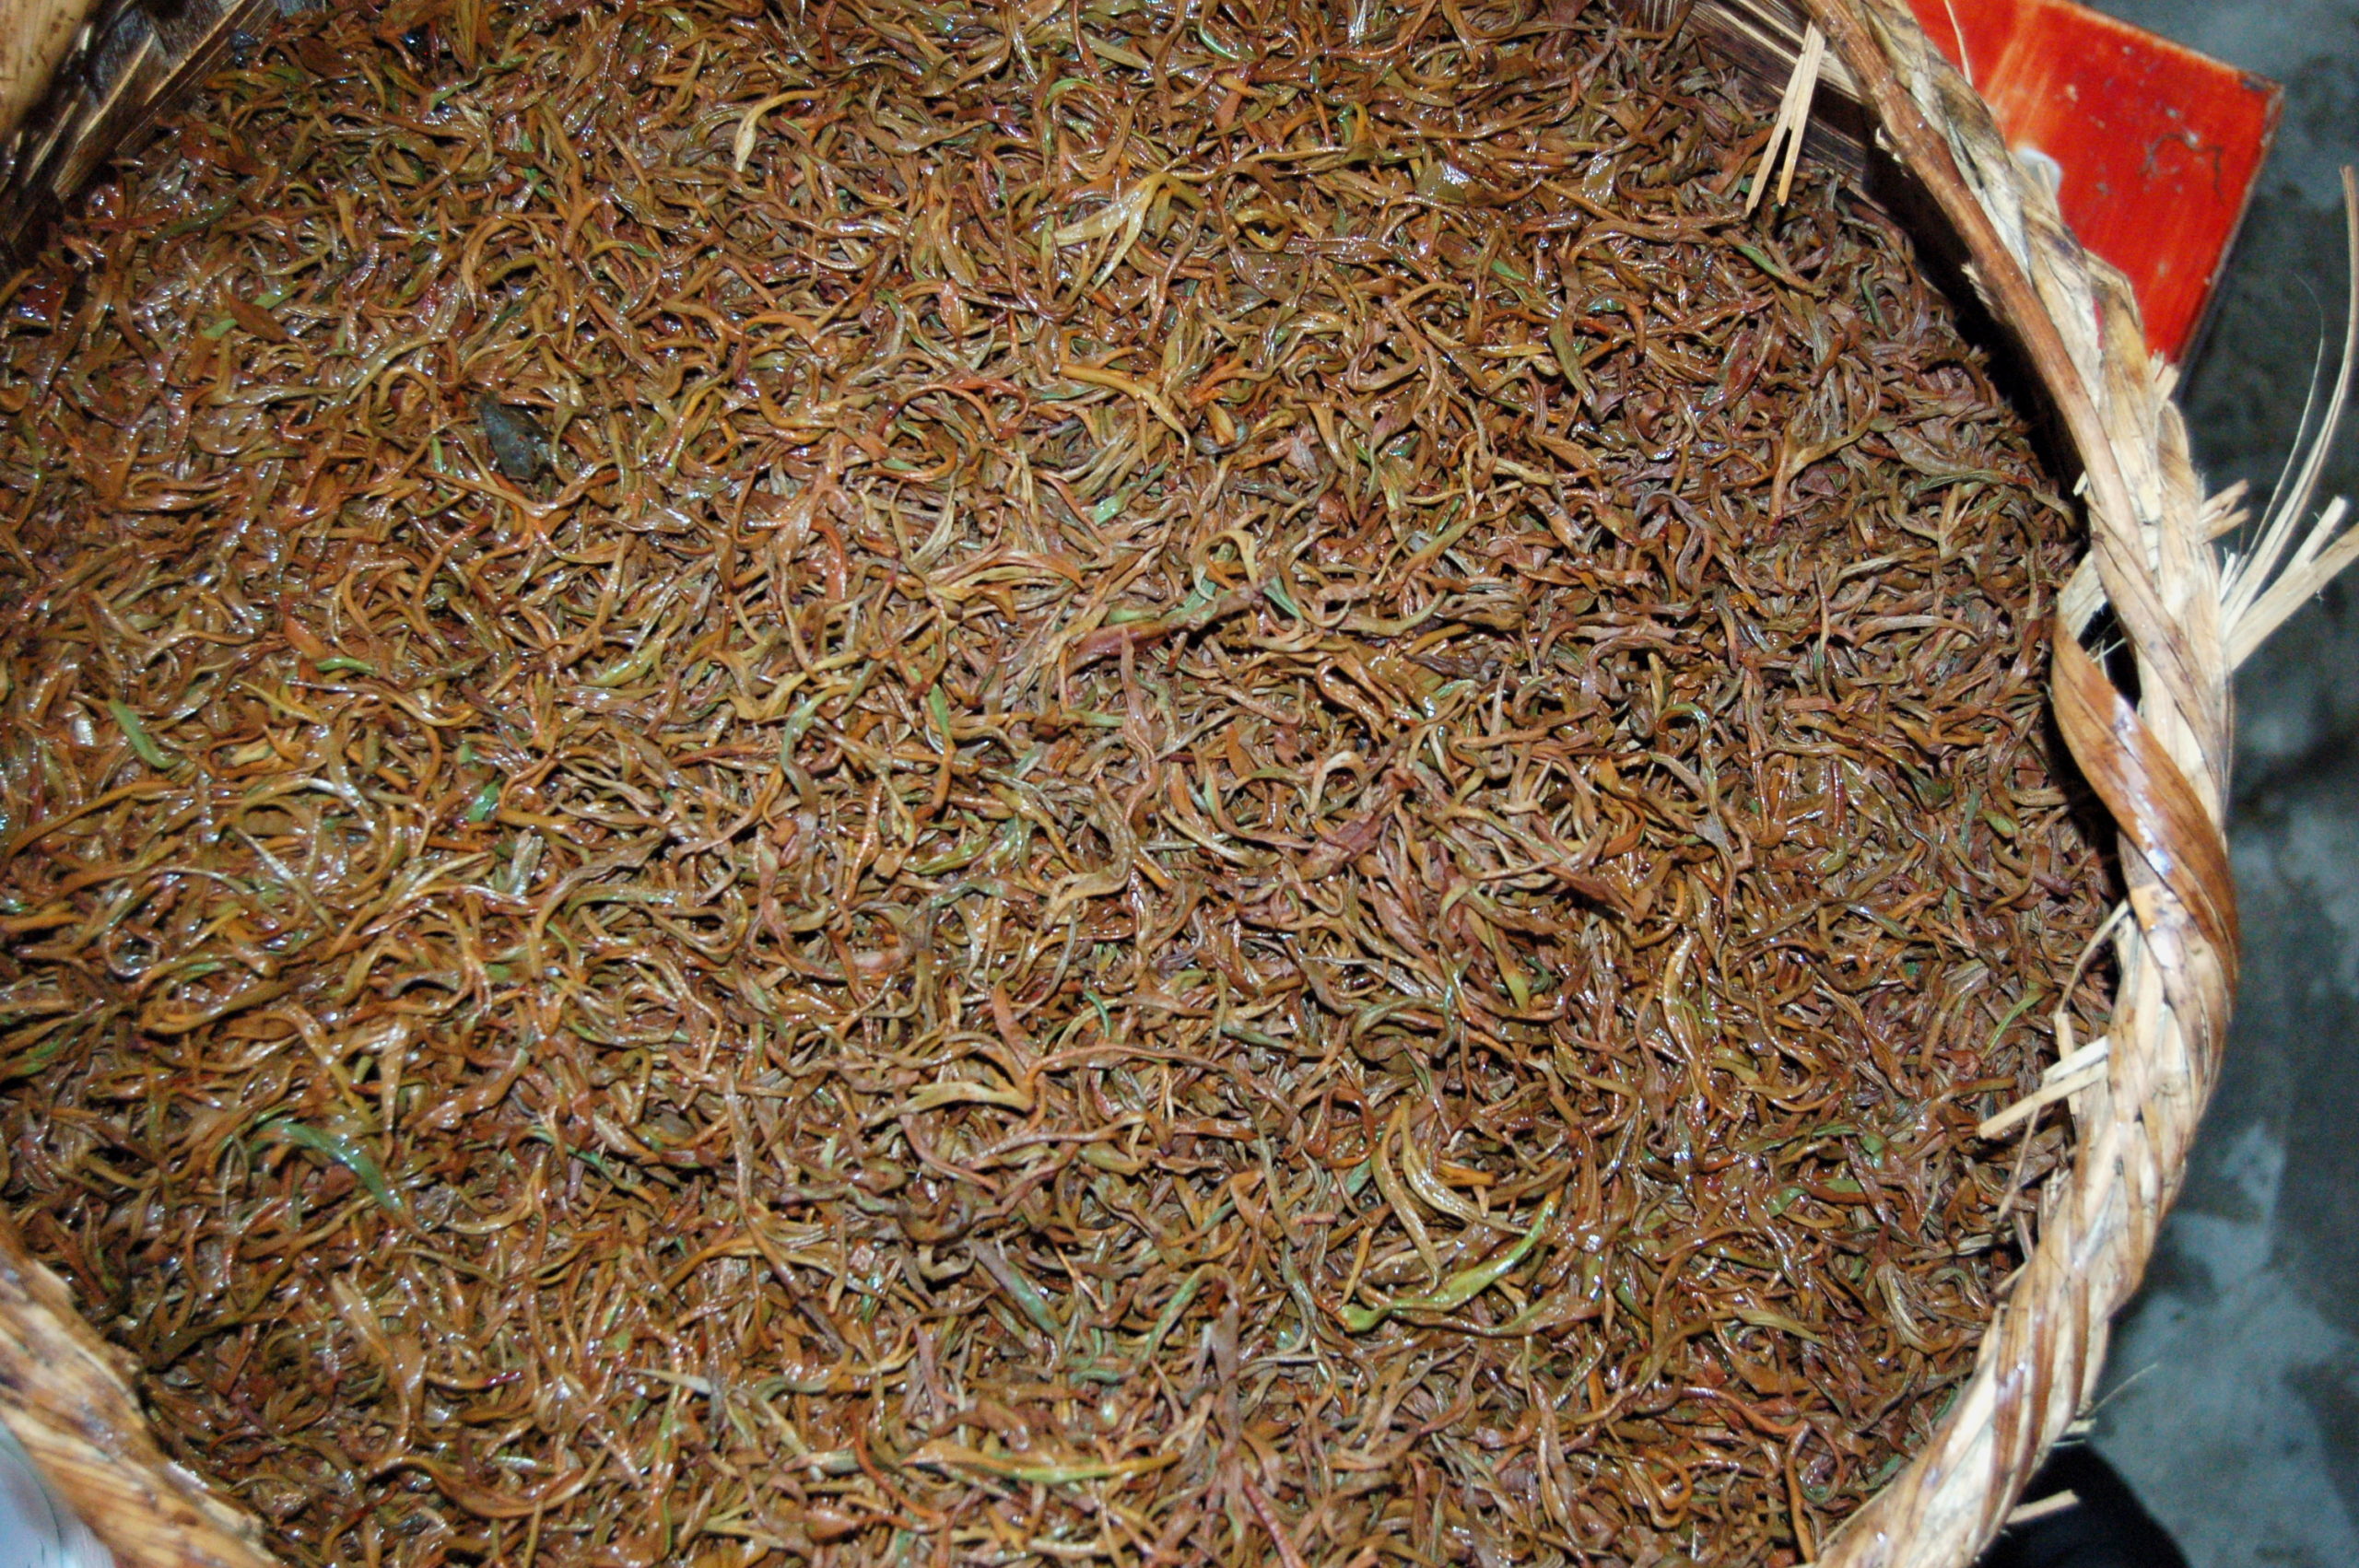 Oxidizing tea buds turning from green to gold, with hints of red.